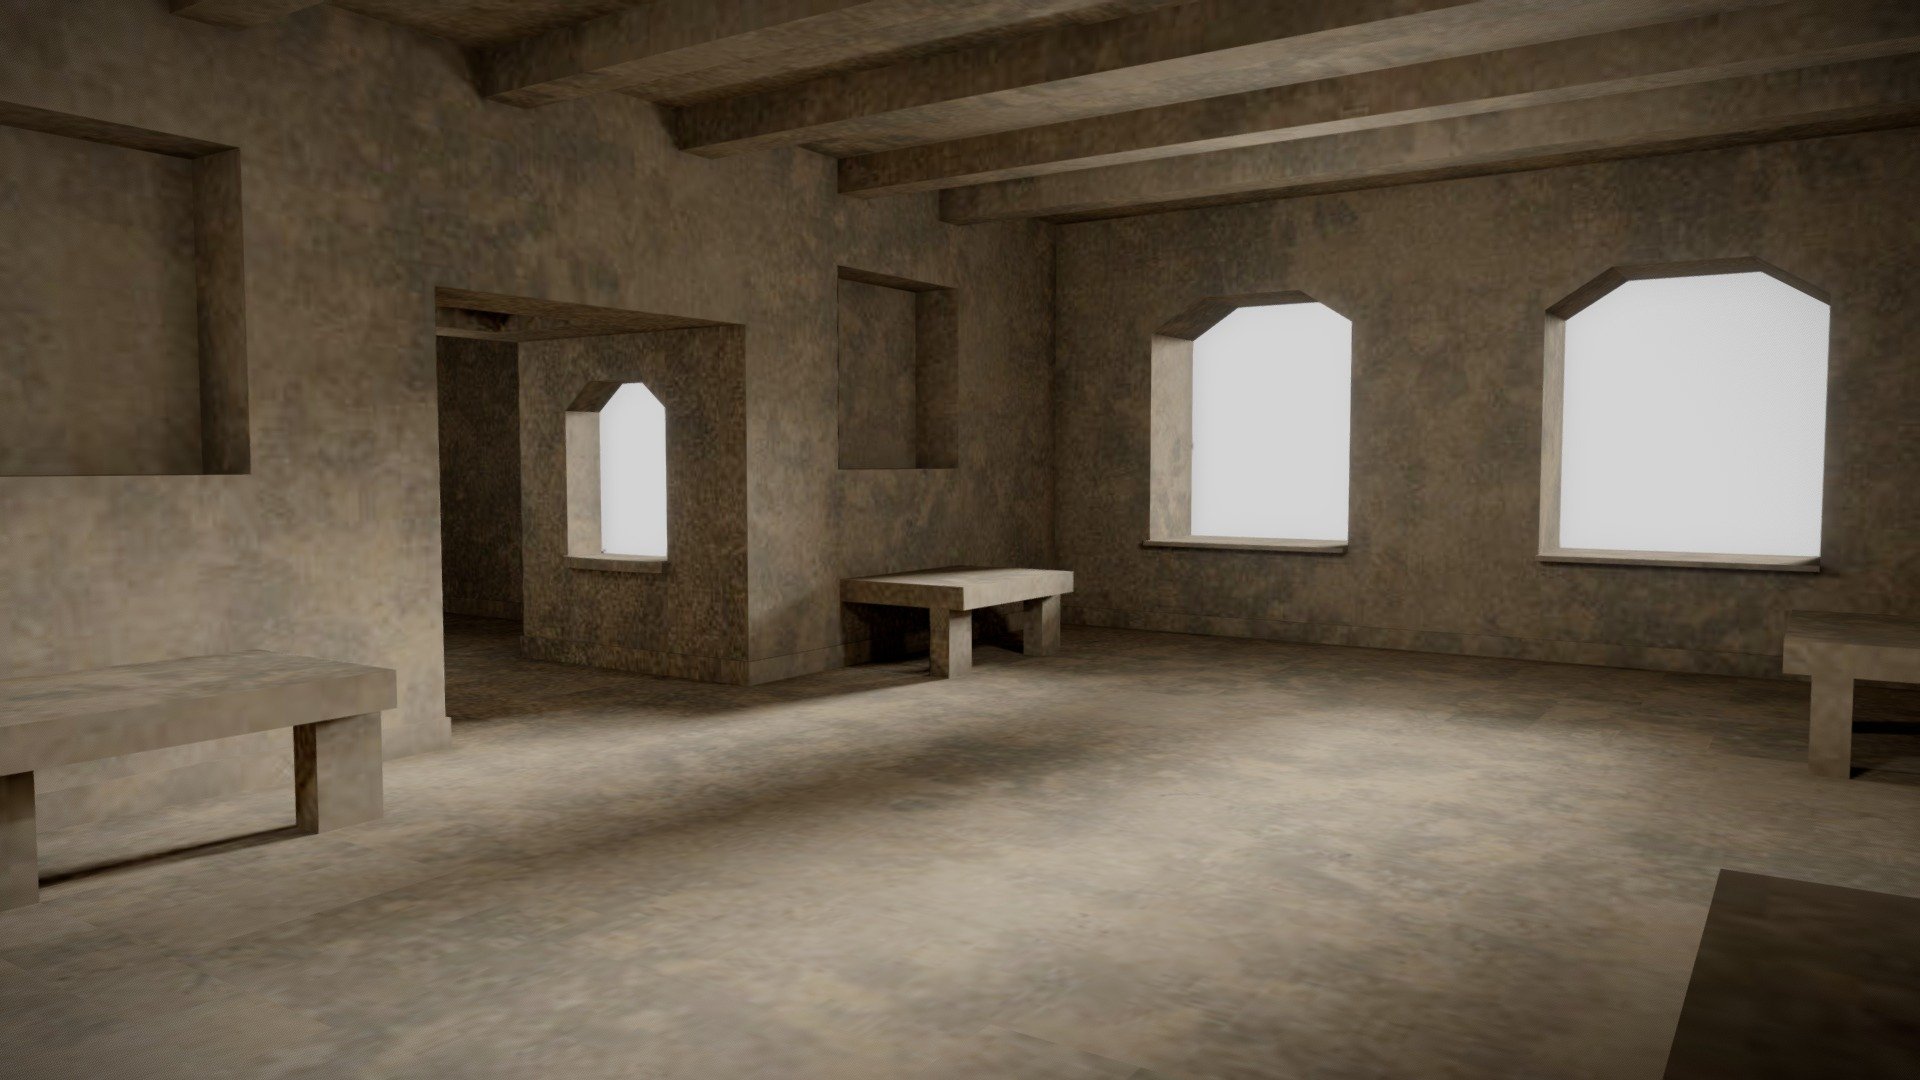 Abandoned Concrete Rooms
Surf my other interior models if you like this!  Don't forget to &ldquo;LIKE